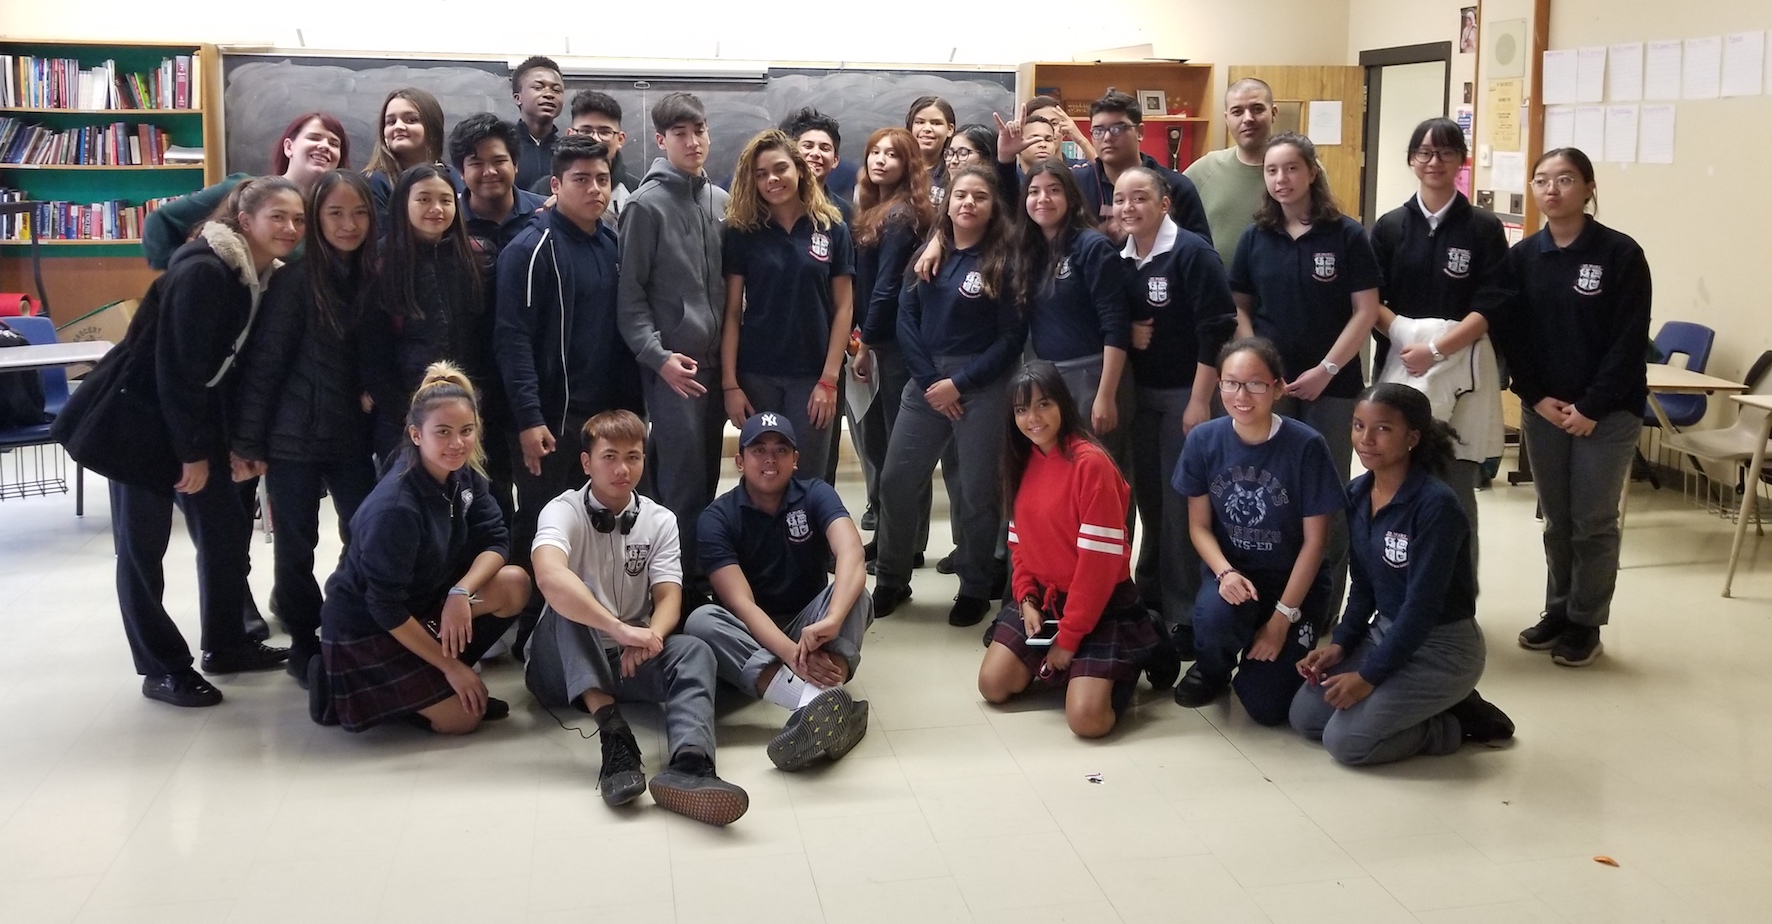 Student leads in the Multicultural Club in one Toronto high school